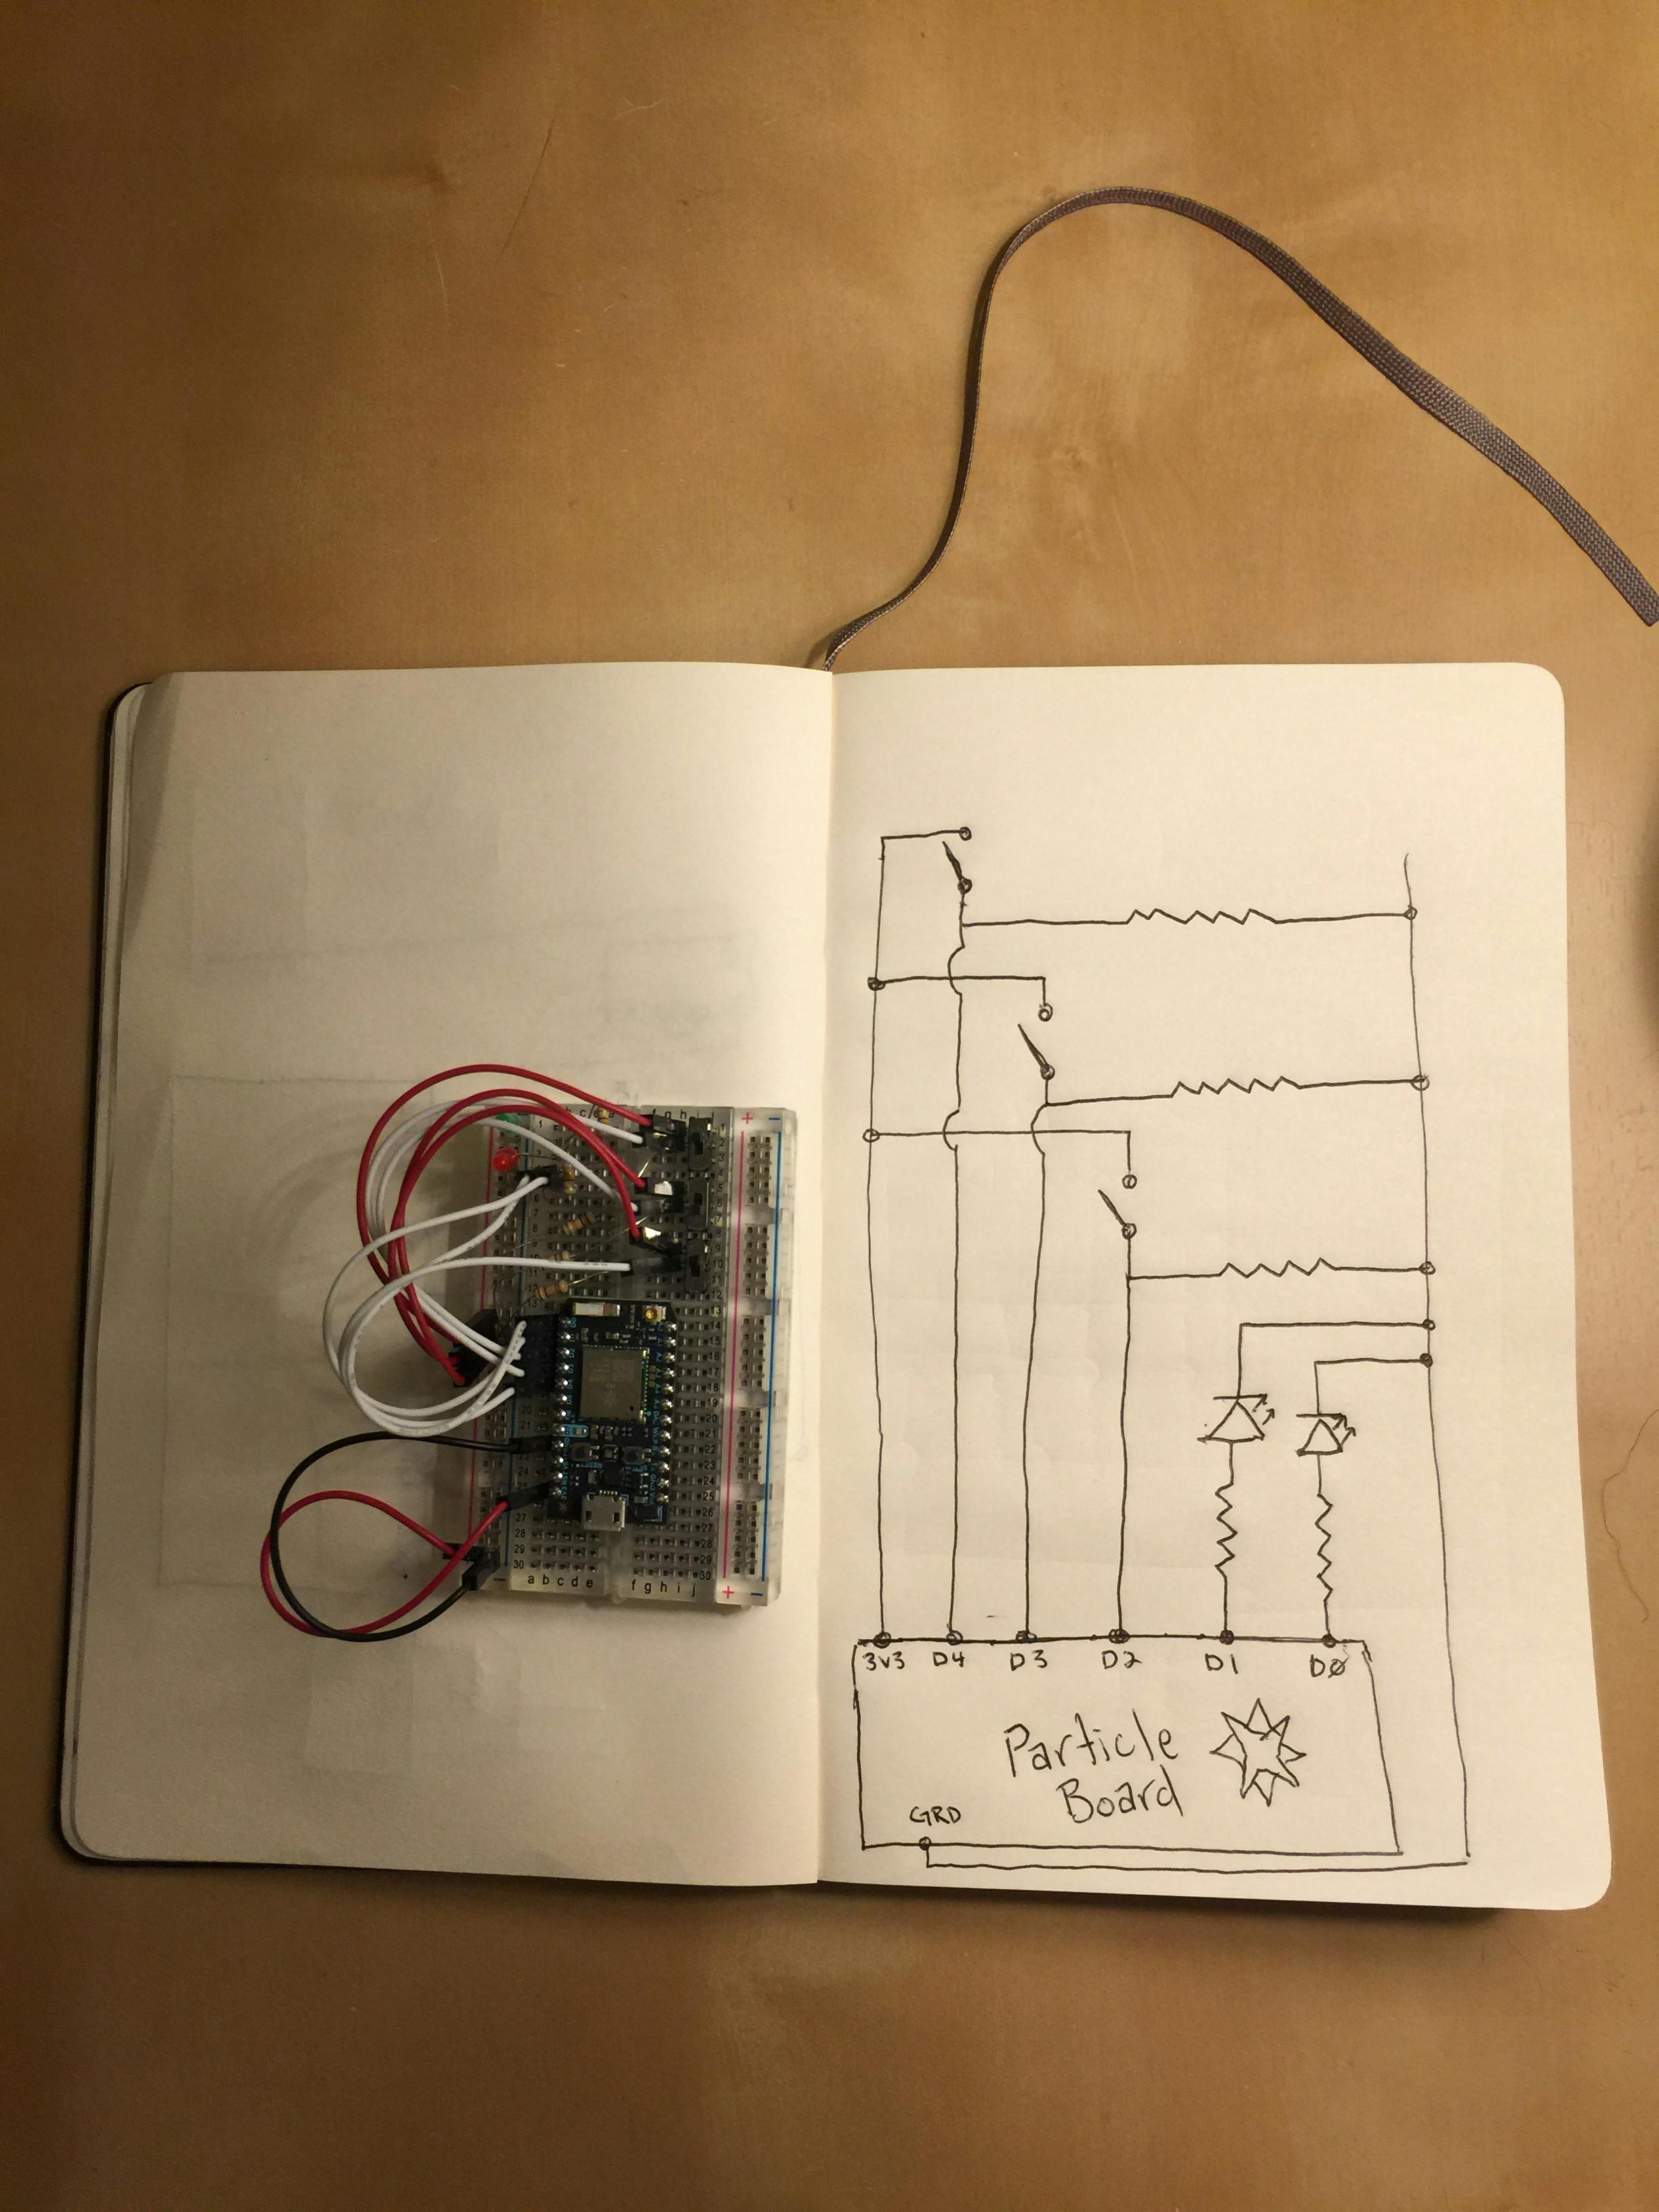 Particle device wired up with matching schematic